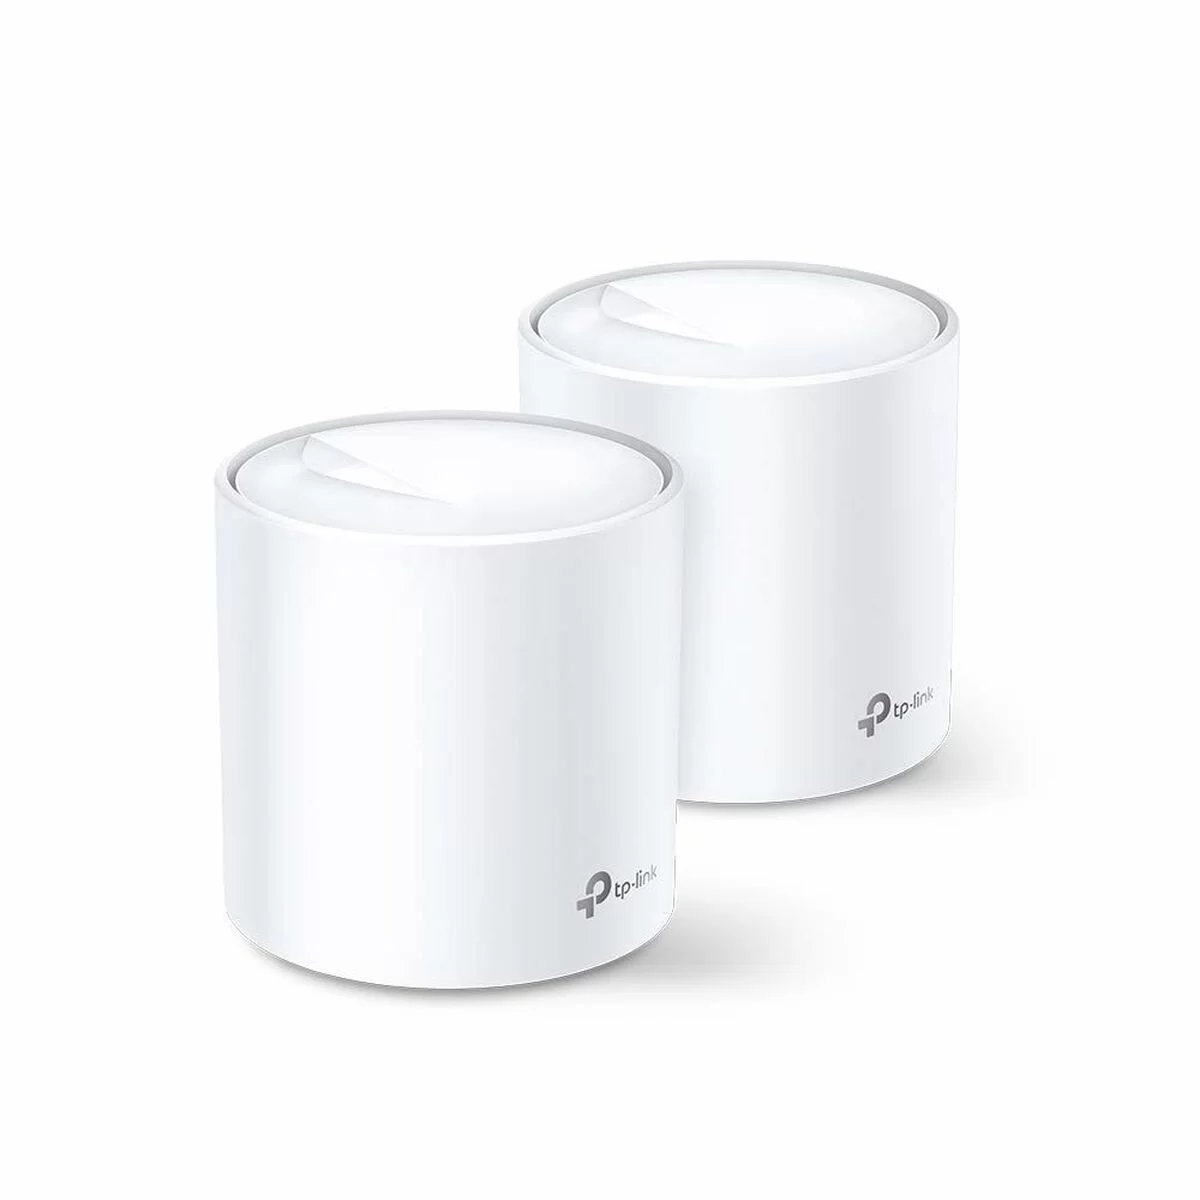 Access point TP-Link Deco X20 (2-pack) 1200 Mbps (2 uds